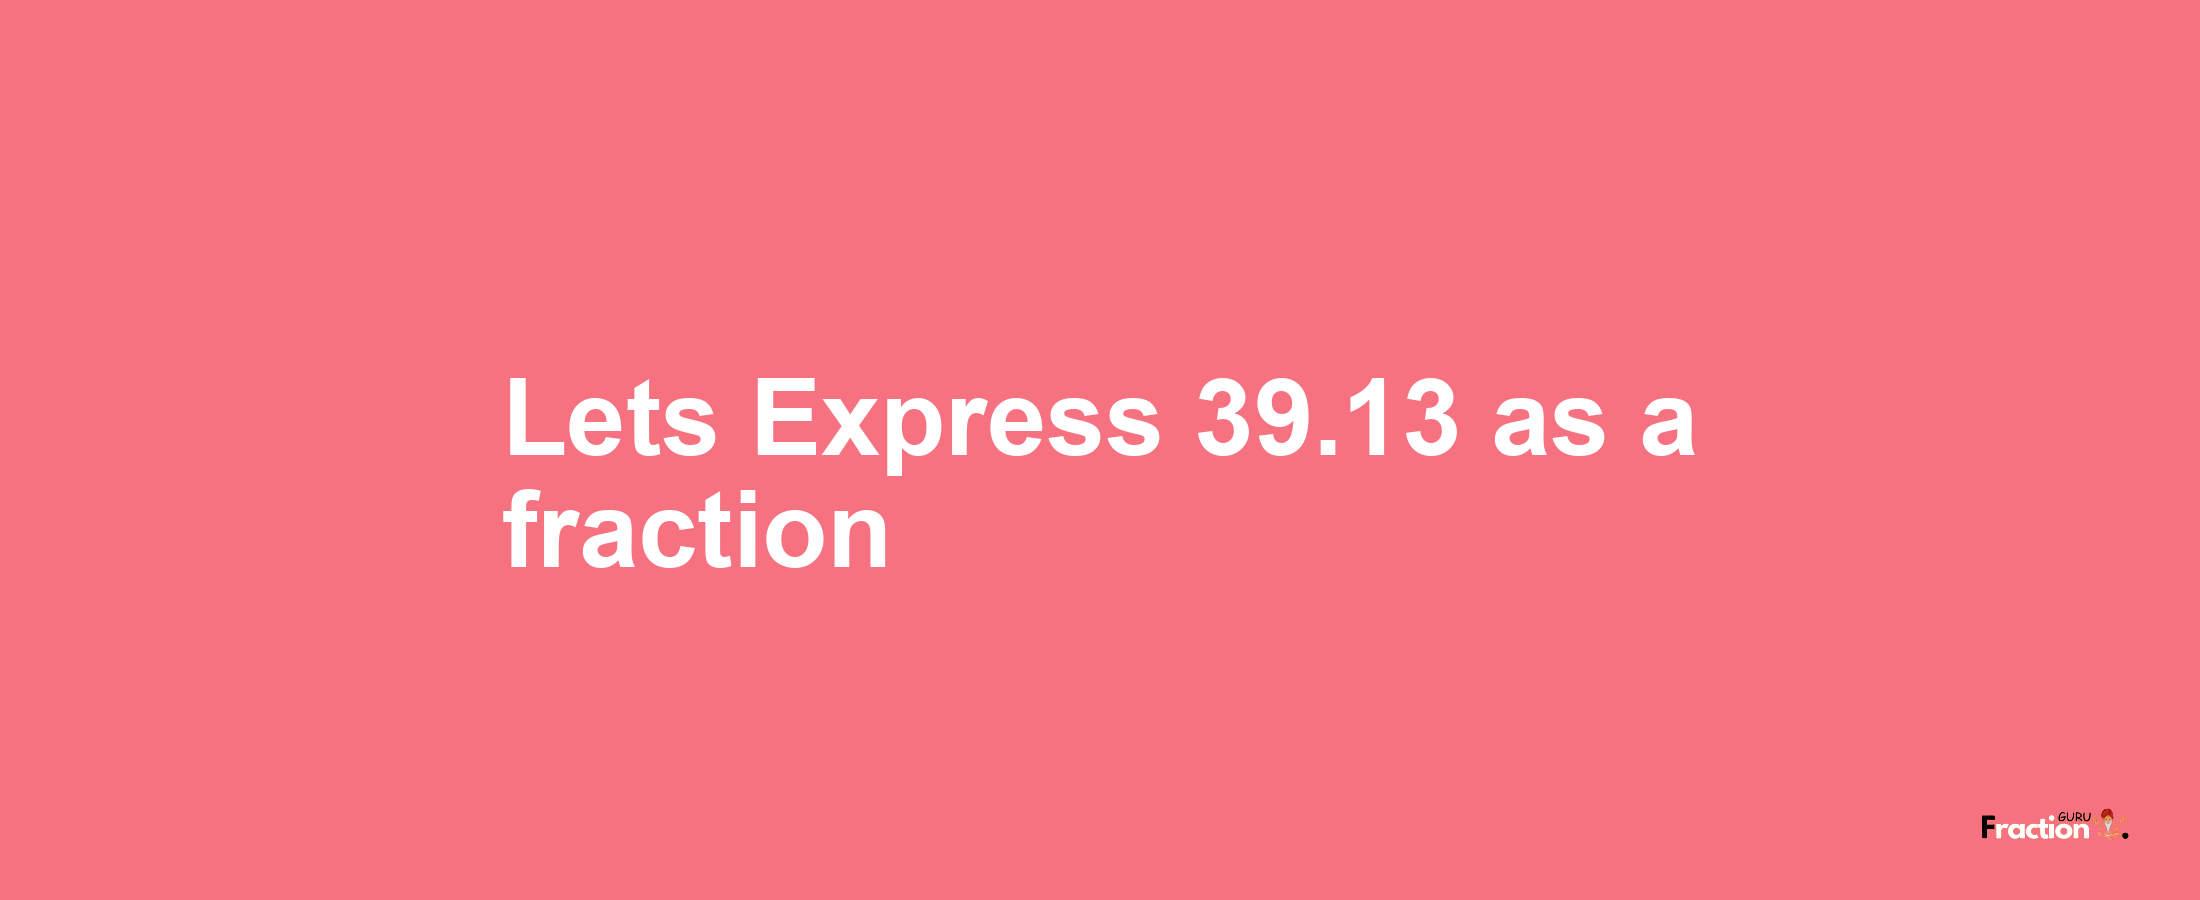 Lets Express 39.13 as afraction